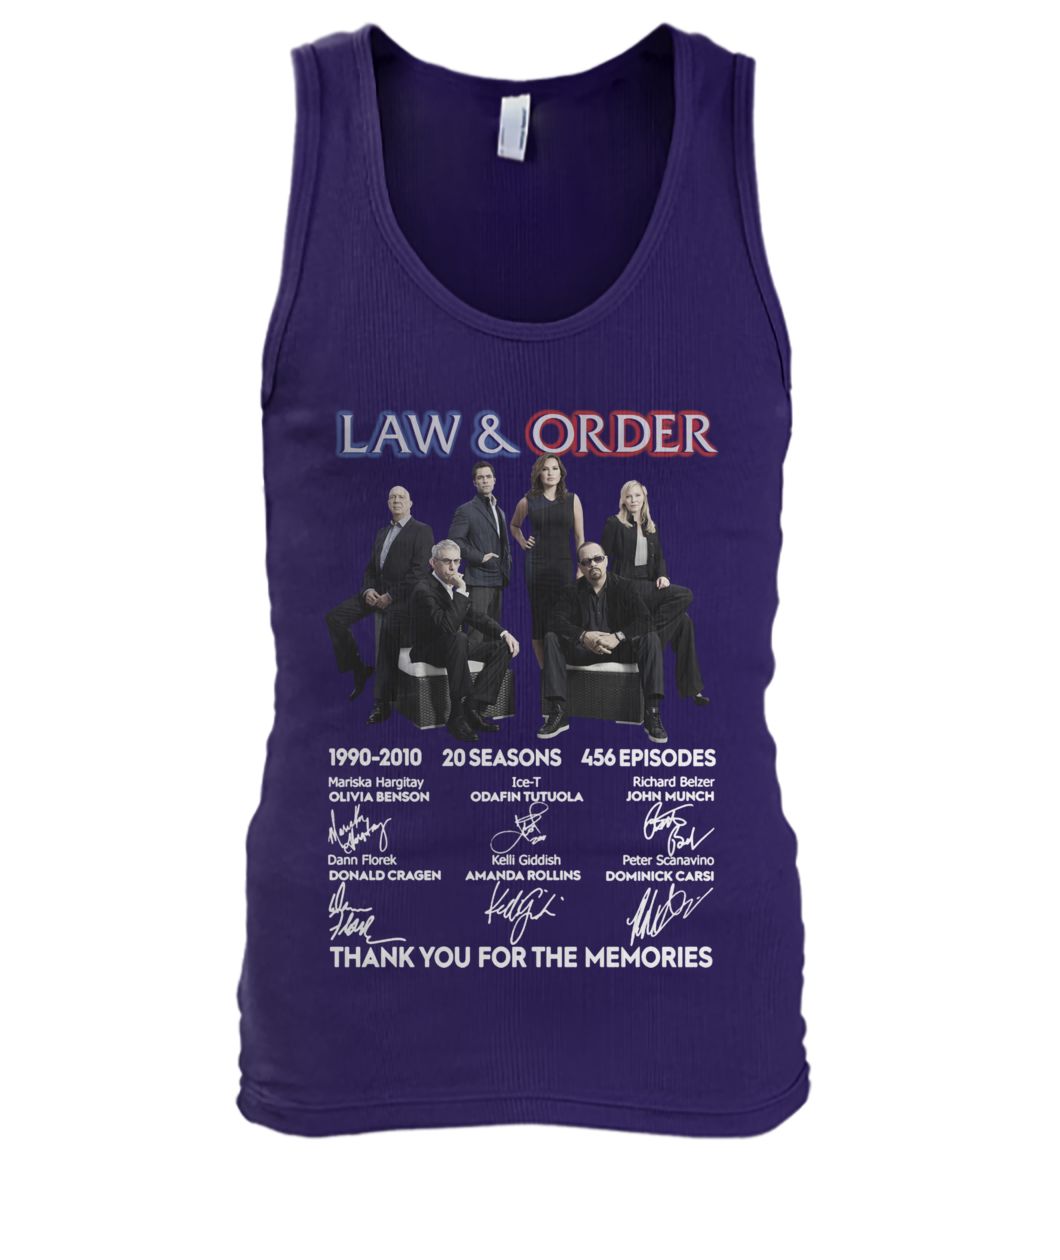 Law and order tv show 1990 2010 20 seasons 456 episodes thank you for memories signatures men's tank top